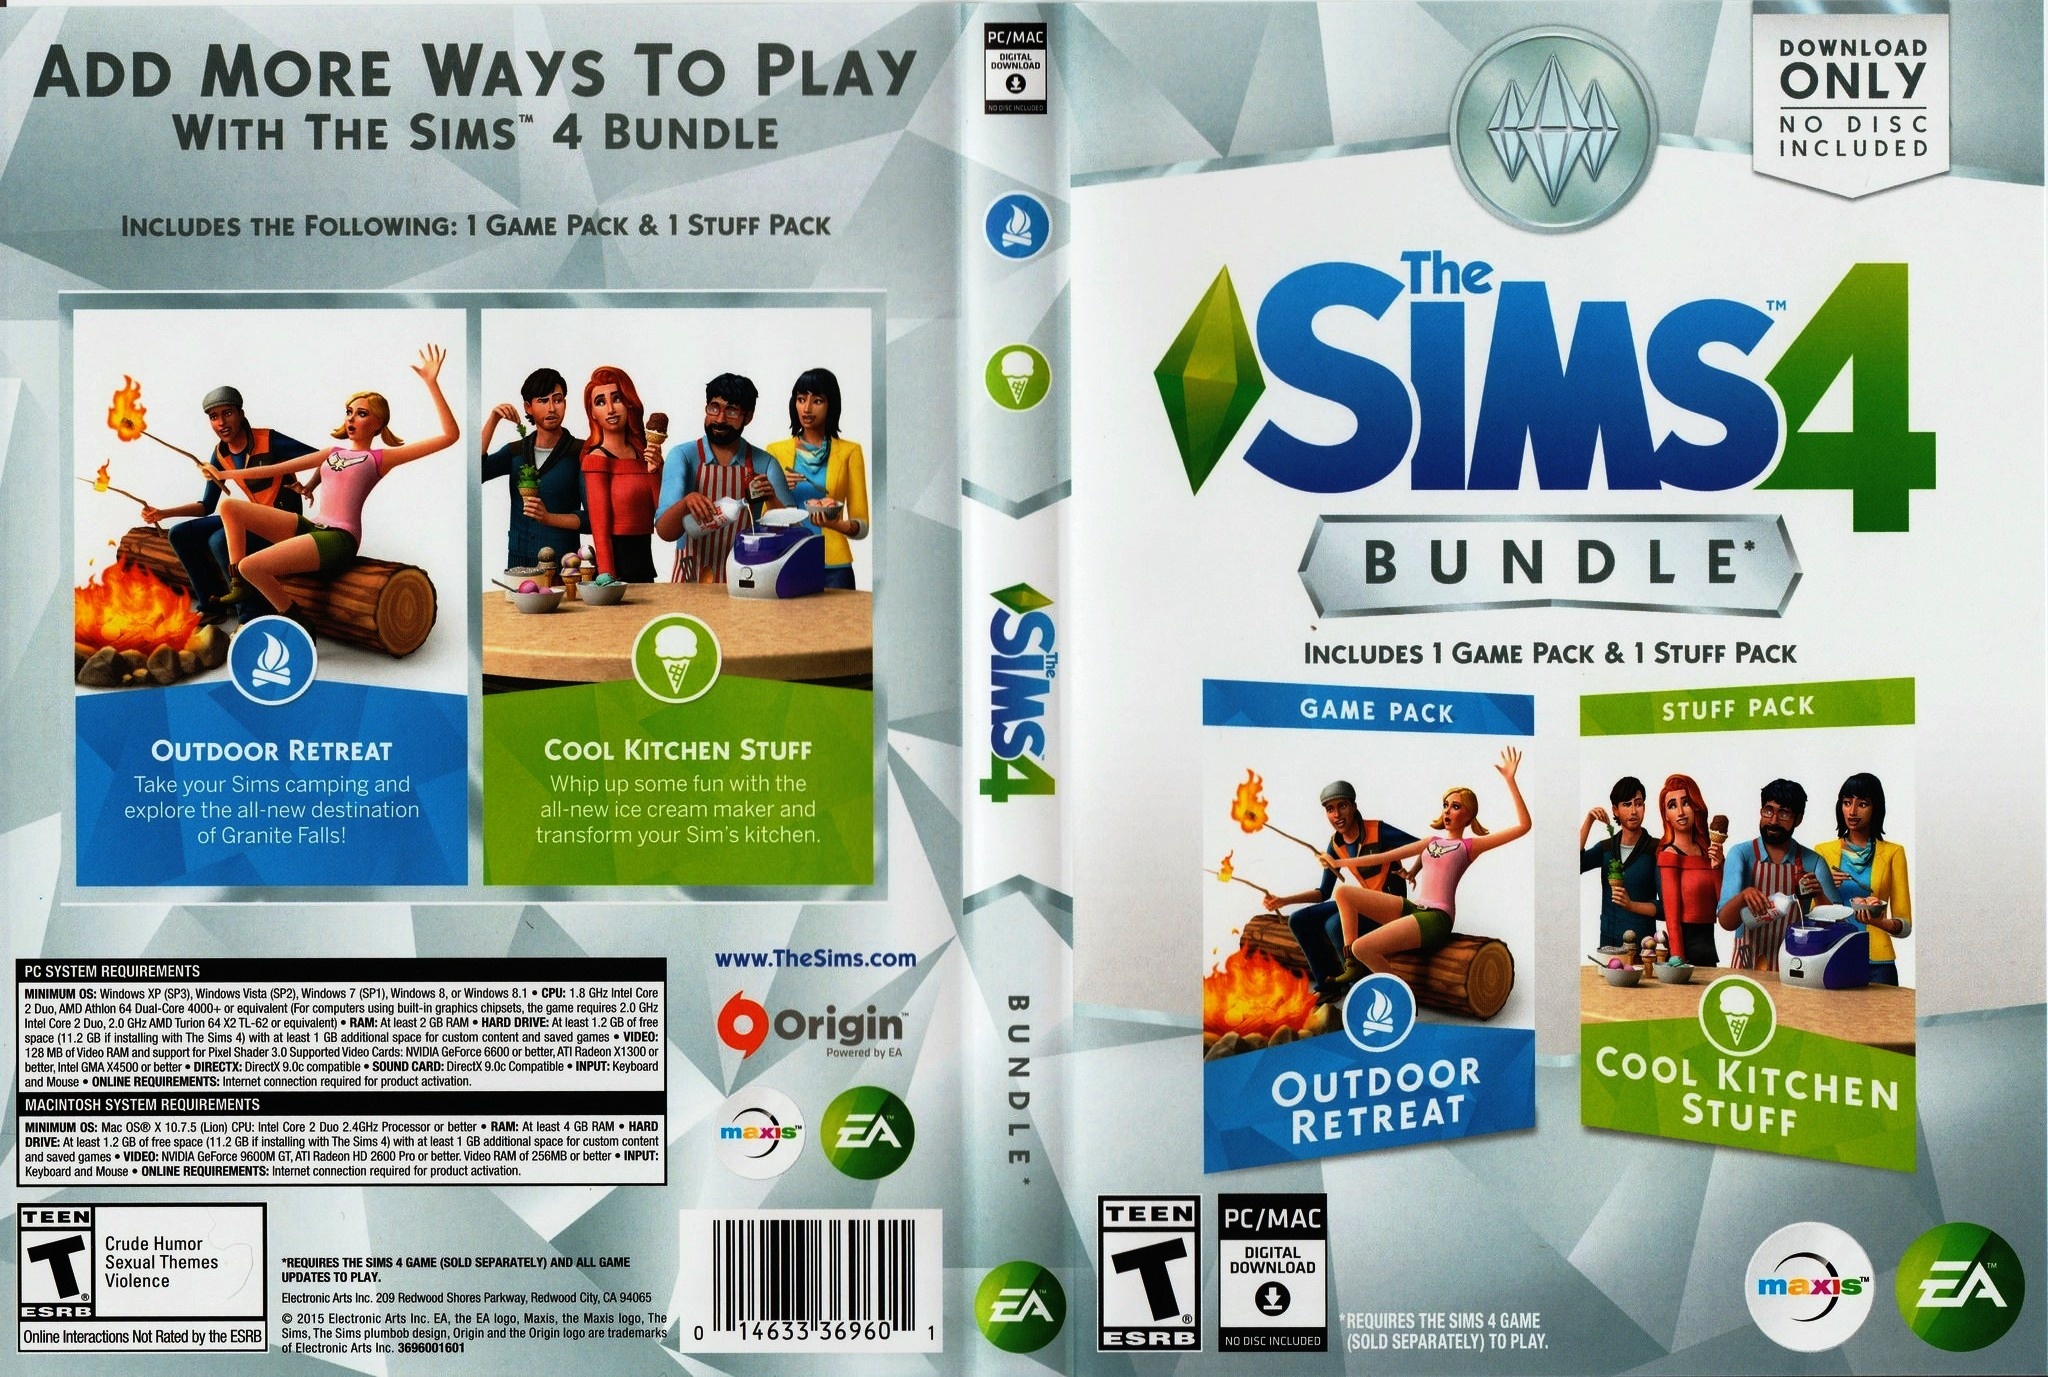 The Sims 4 Bundle box cover